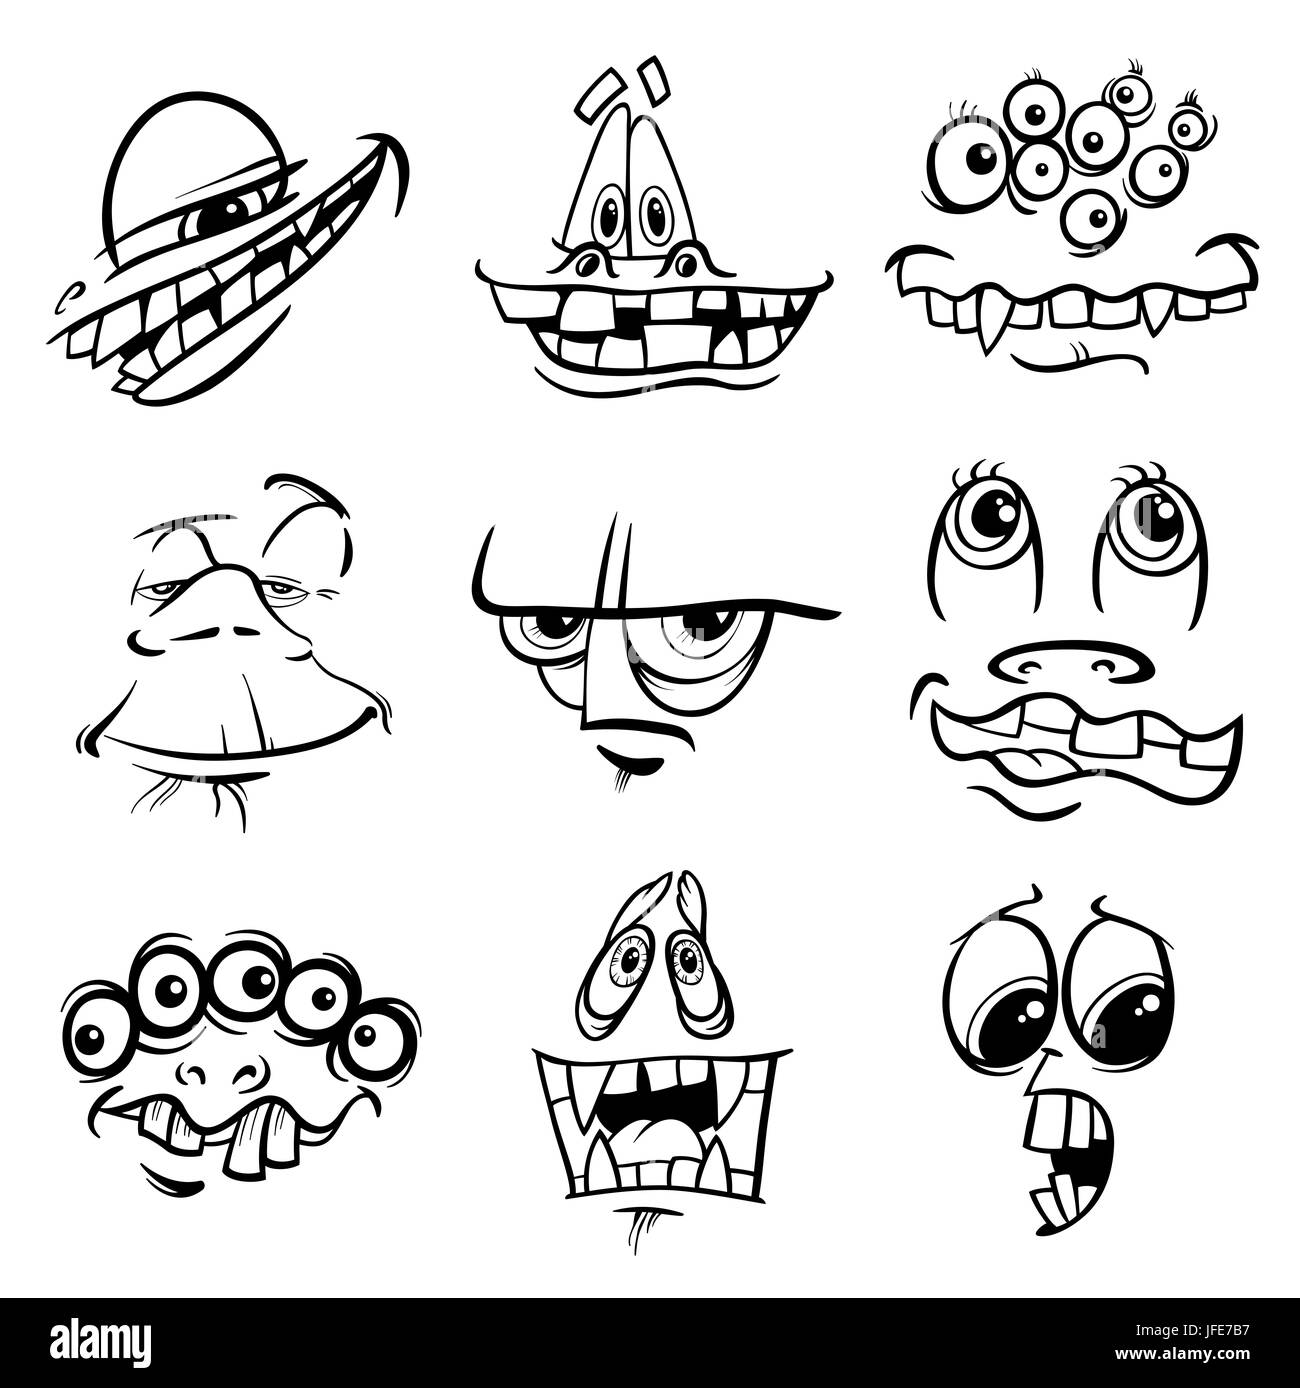 black and white monster characters Stock Photo